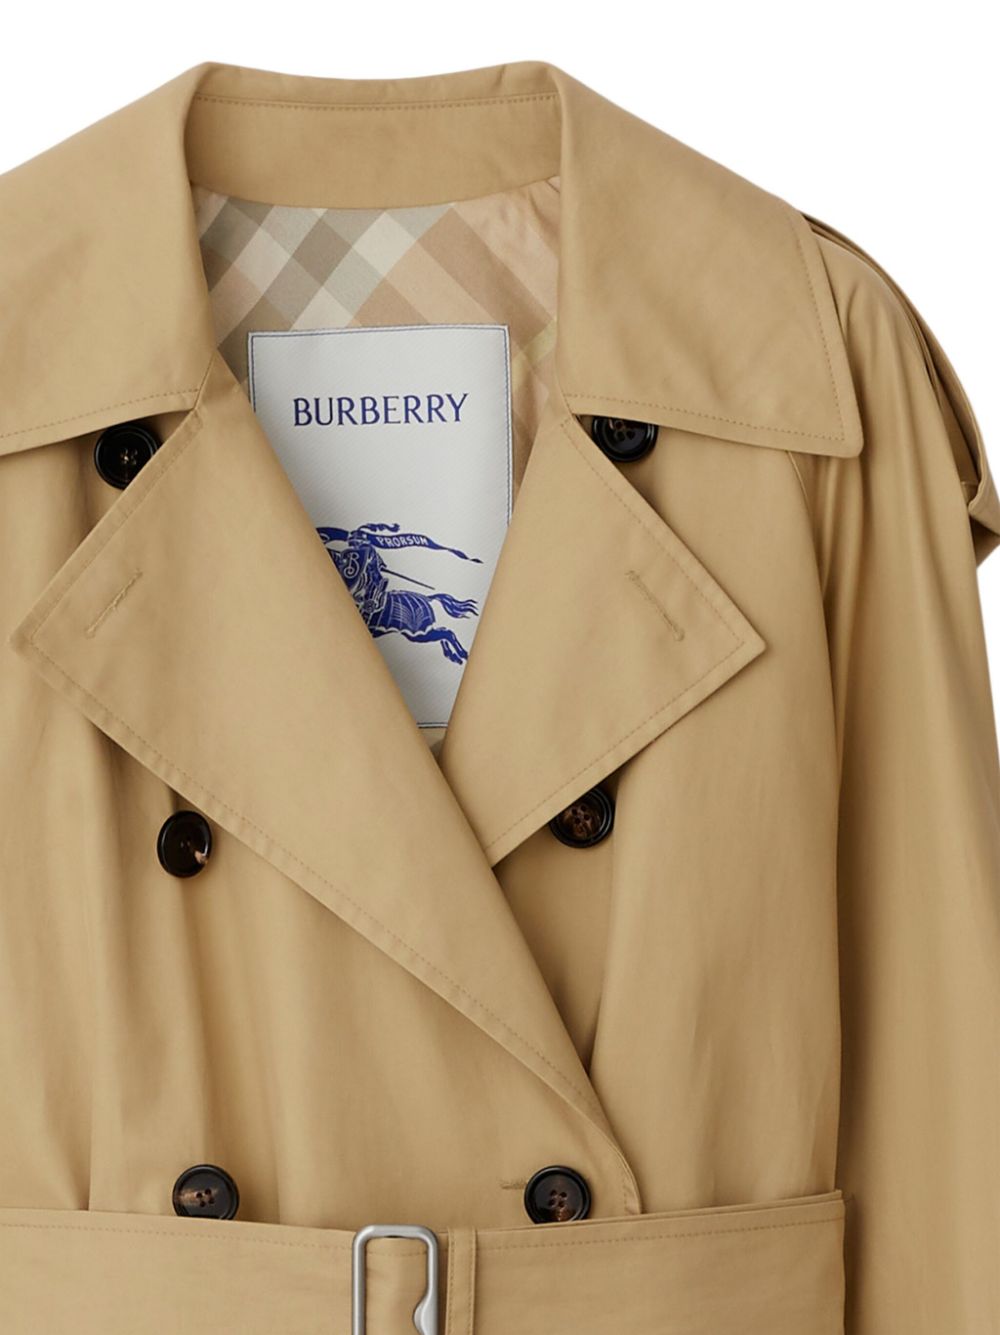 Burberry BURBERRY- Cotton Trench Coat